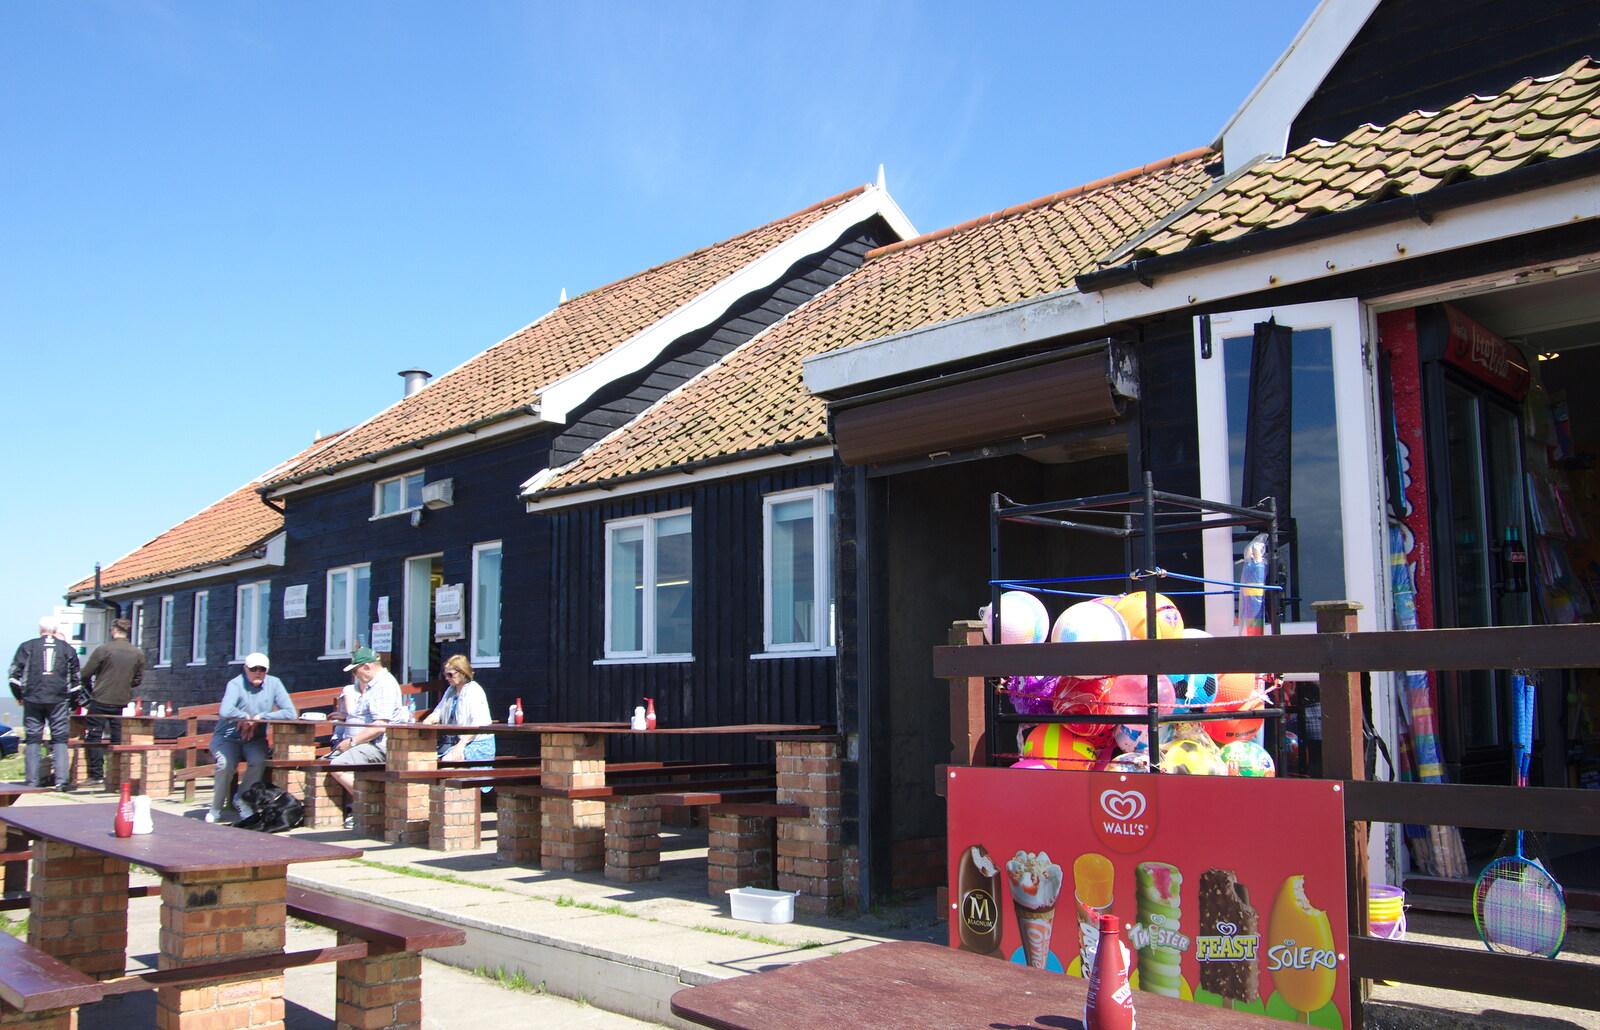 The chipper and ice cream shop at Dunwich from Cliff House Camping, Dunwich, Suffolk - 15th June 2019